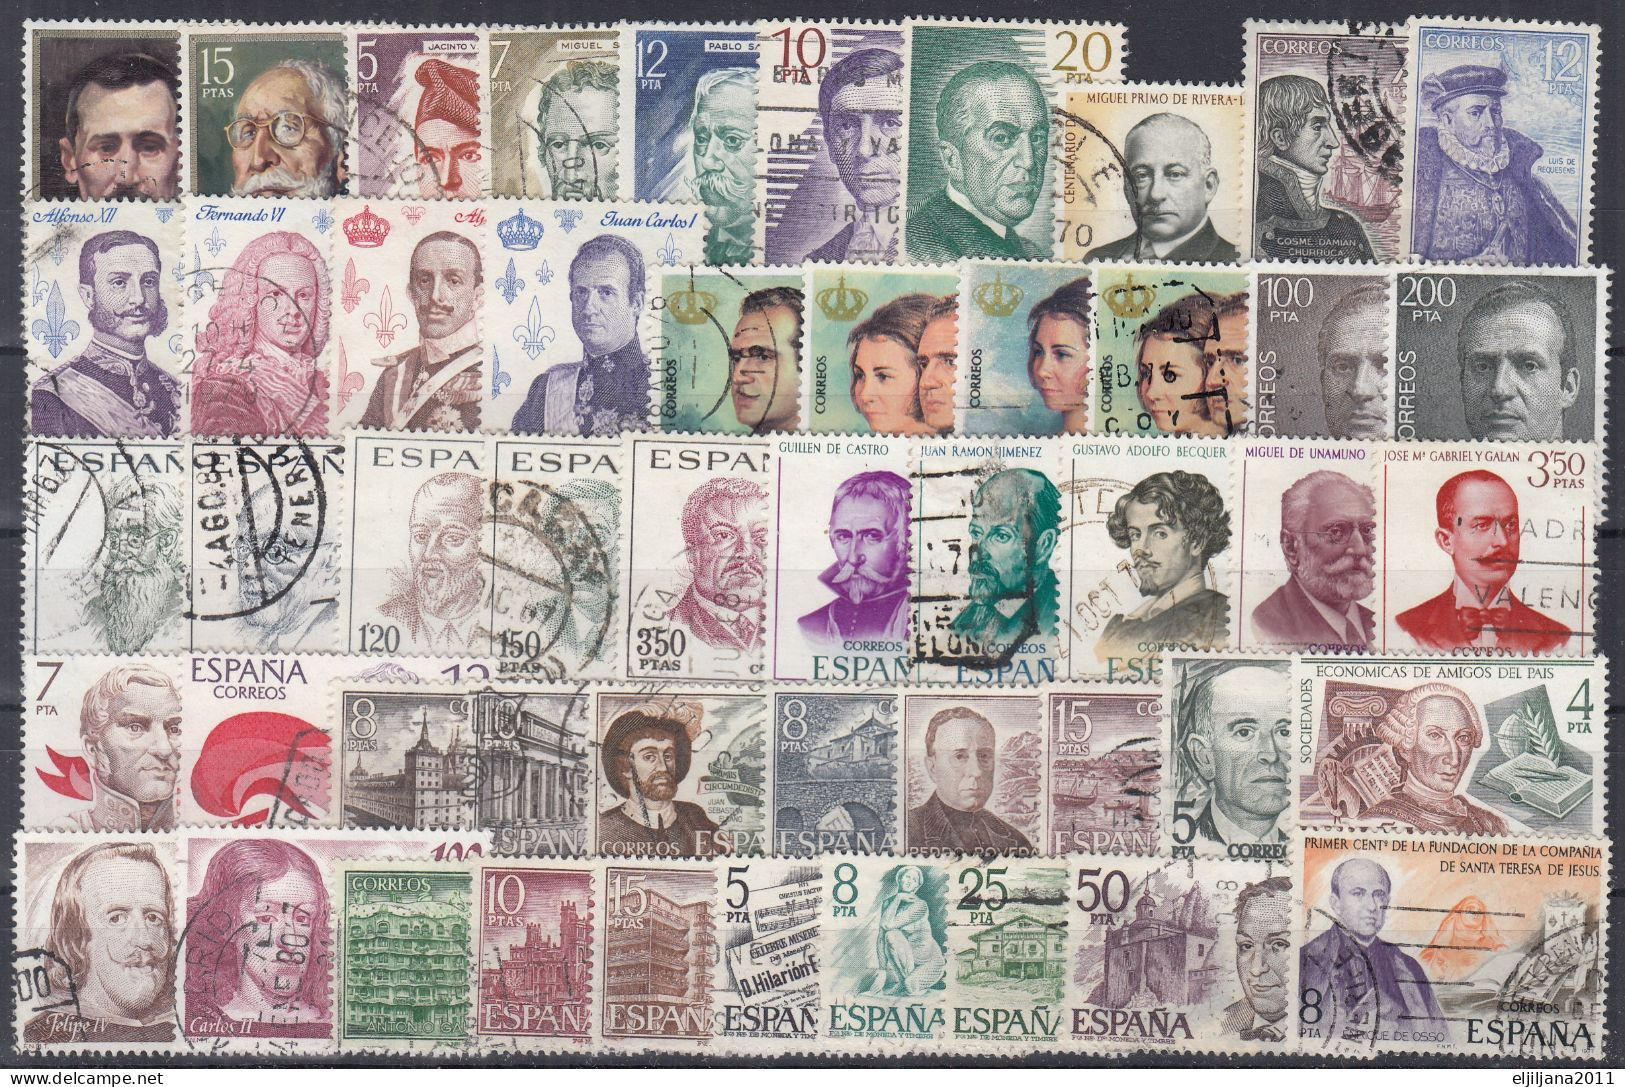 Action !! SALE !! 50 % OFF !! ⁕ SPAIN 1968 - 1981 ESPANA ⁕ Famous People ⁕ 50v Used - See All Scan - Sammlungen